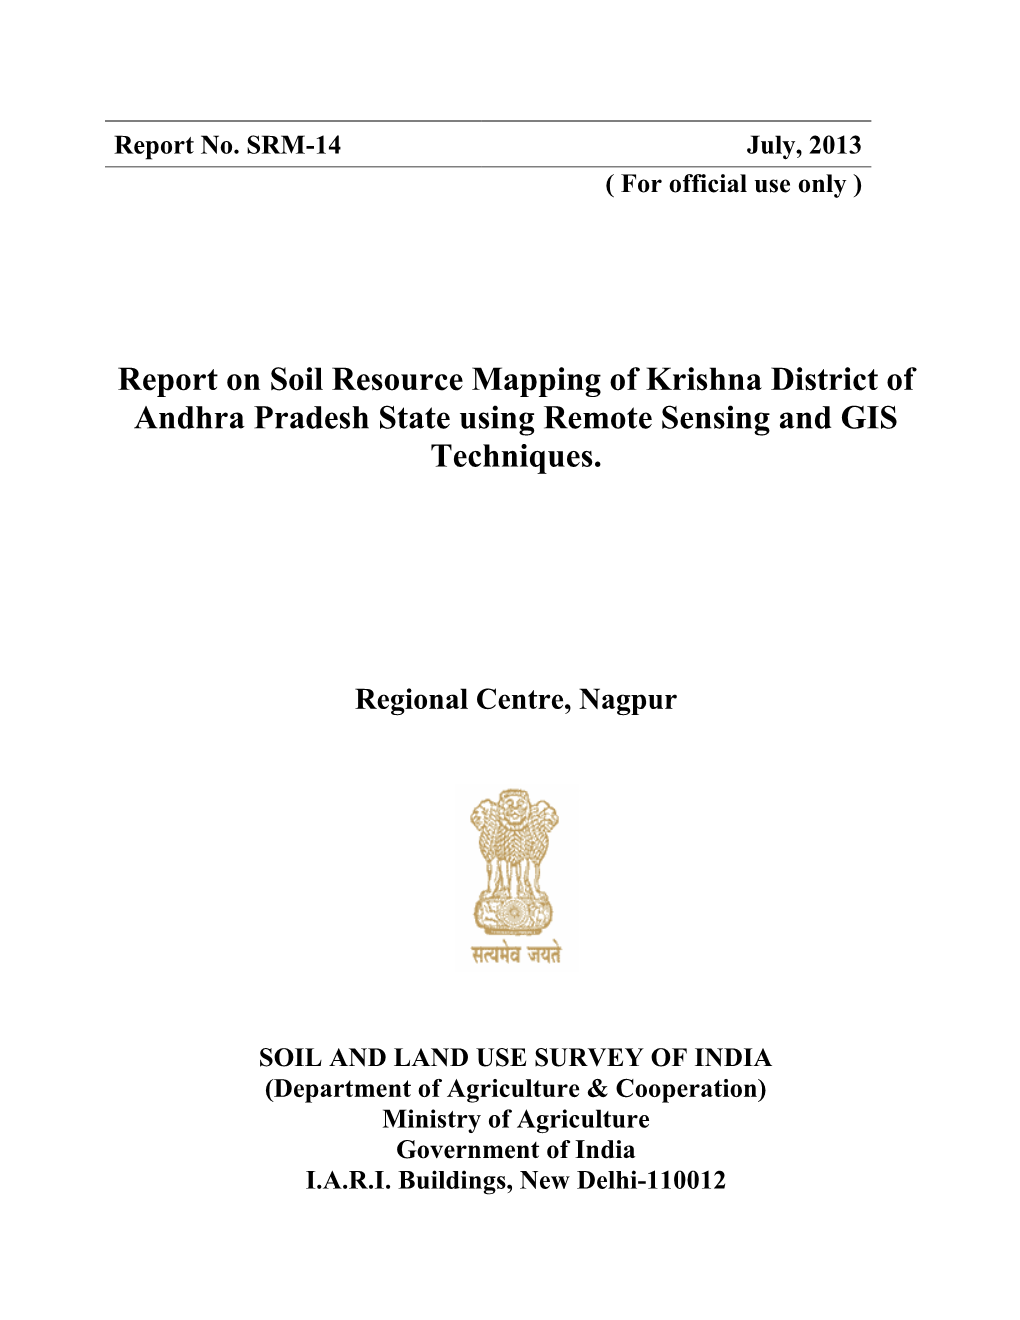 Report on Soil Resource Mapping of Krishna District of Andhra Pradesh State Using Remote Sensing and GIS Techniques